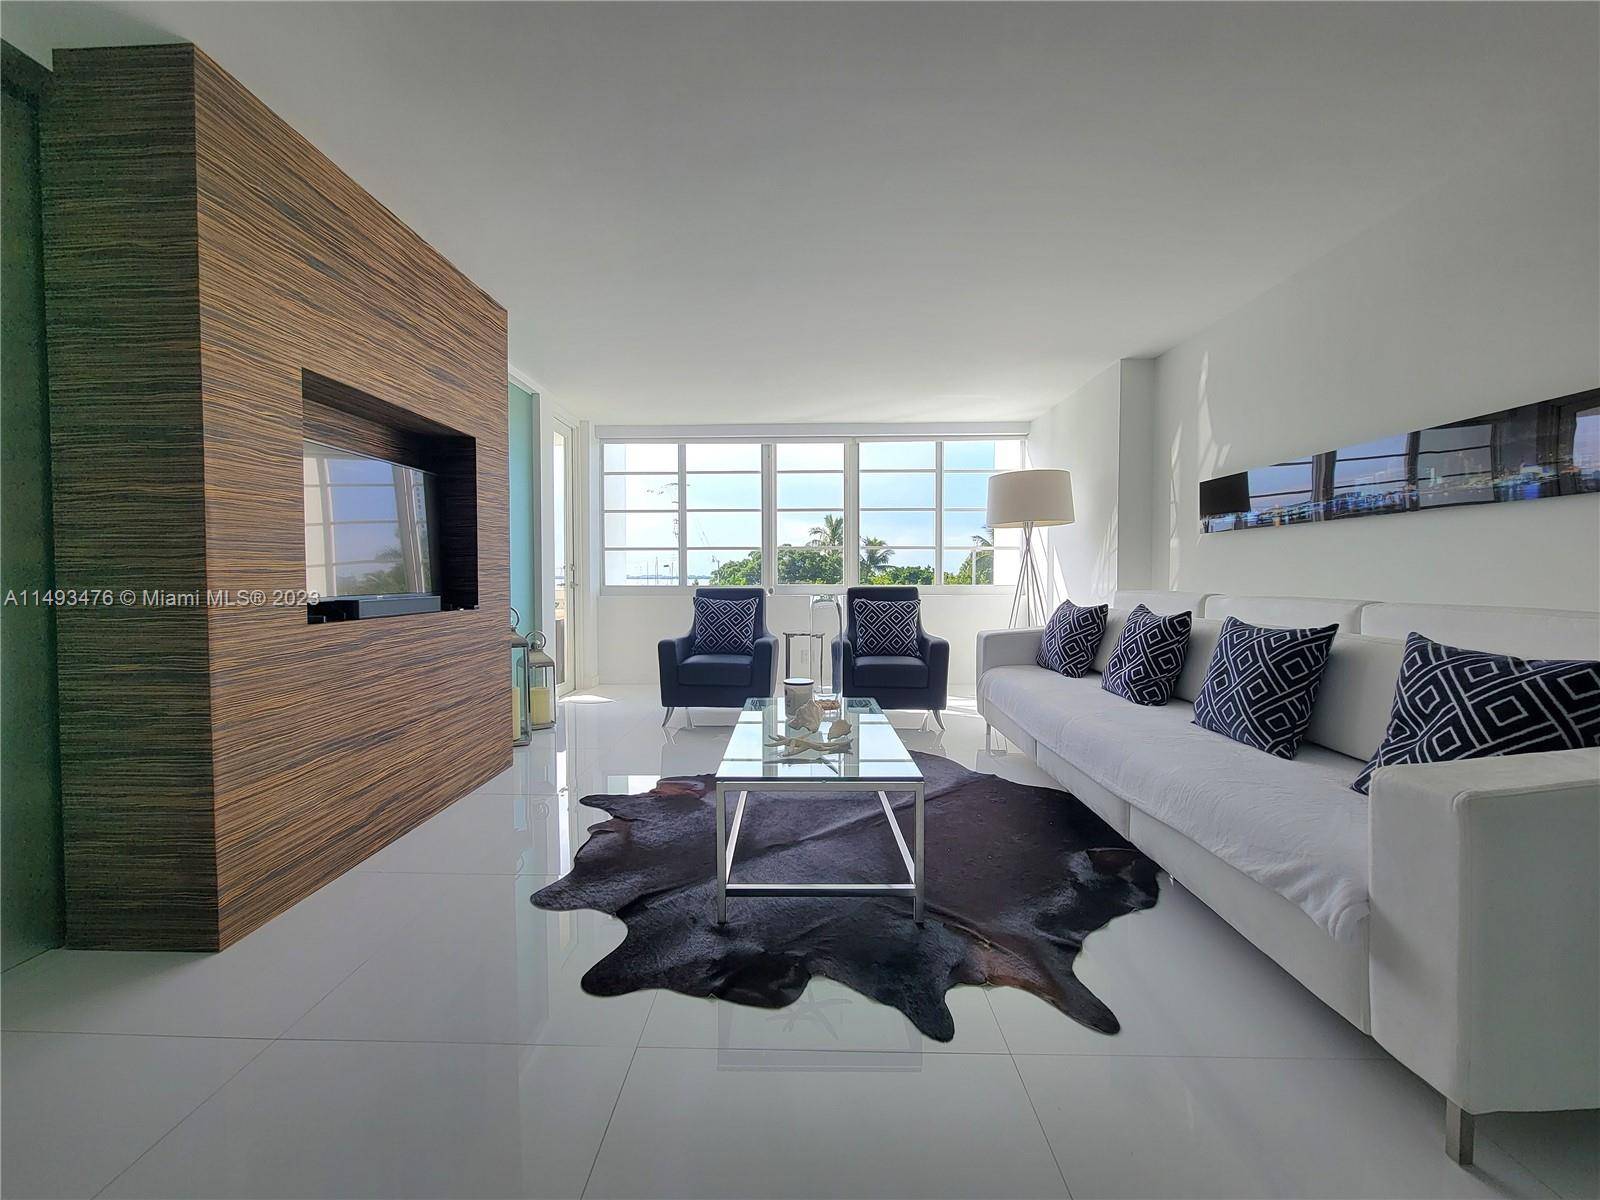 The best location in South Beach situated between Lincoln Road and Sunset Harbor.